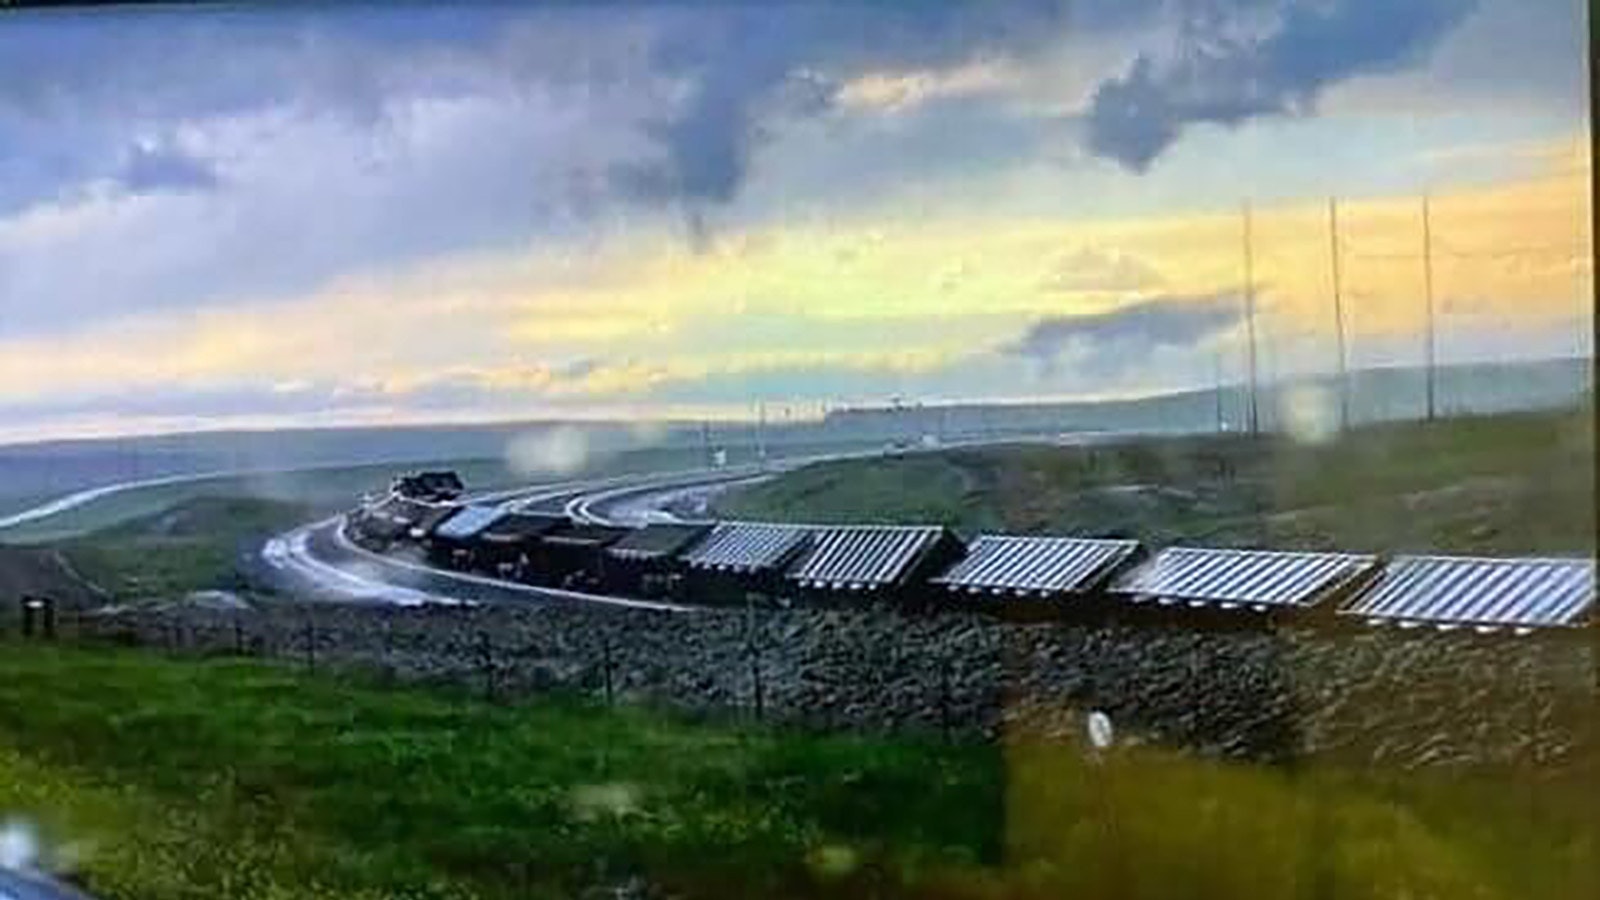 A train derailed by a tornado at North Antelope Rochelle coal mine in Wyoming's Powder River Basin.